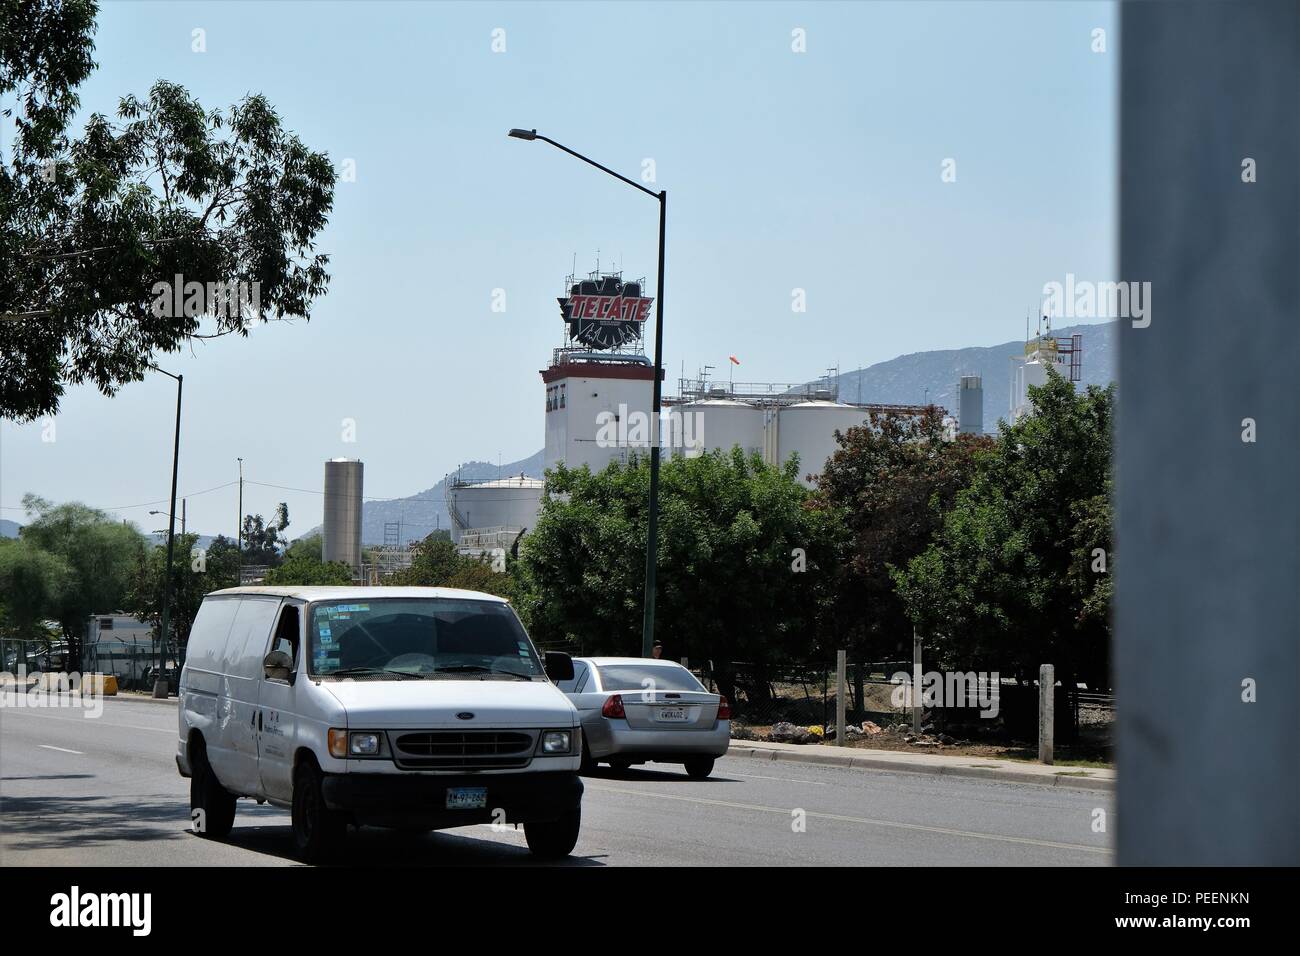 Tecate brewery from a distance in Tecate, Baja California, Mexico. Stock Photo